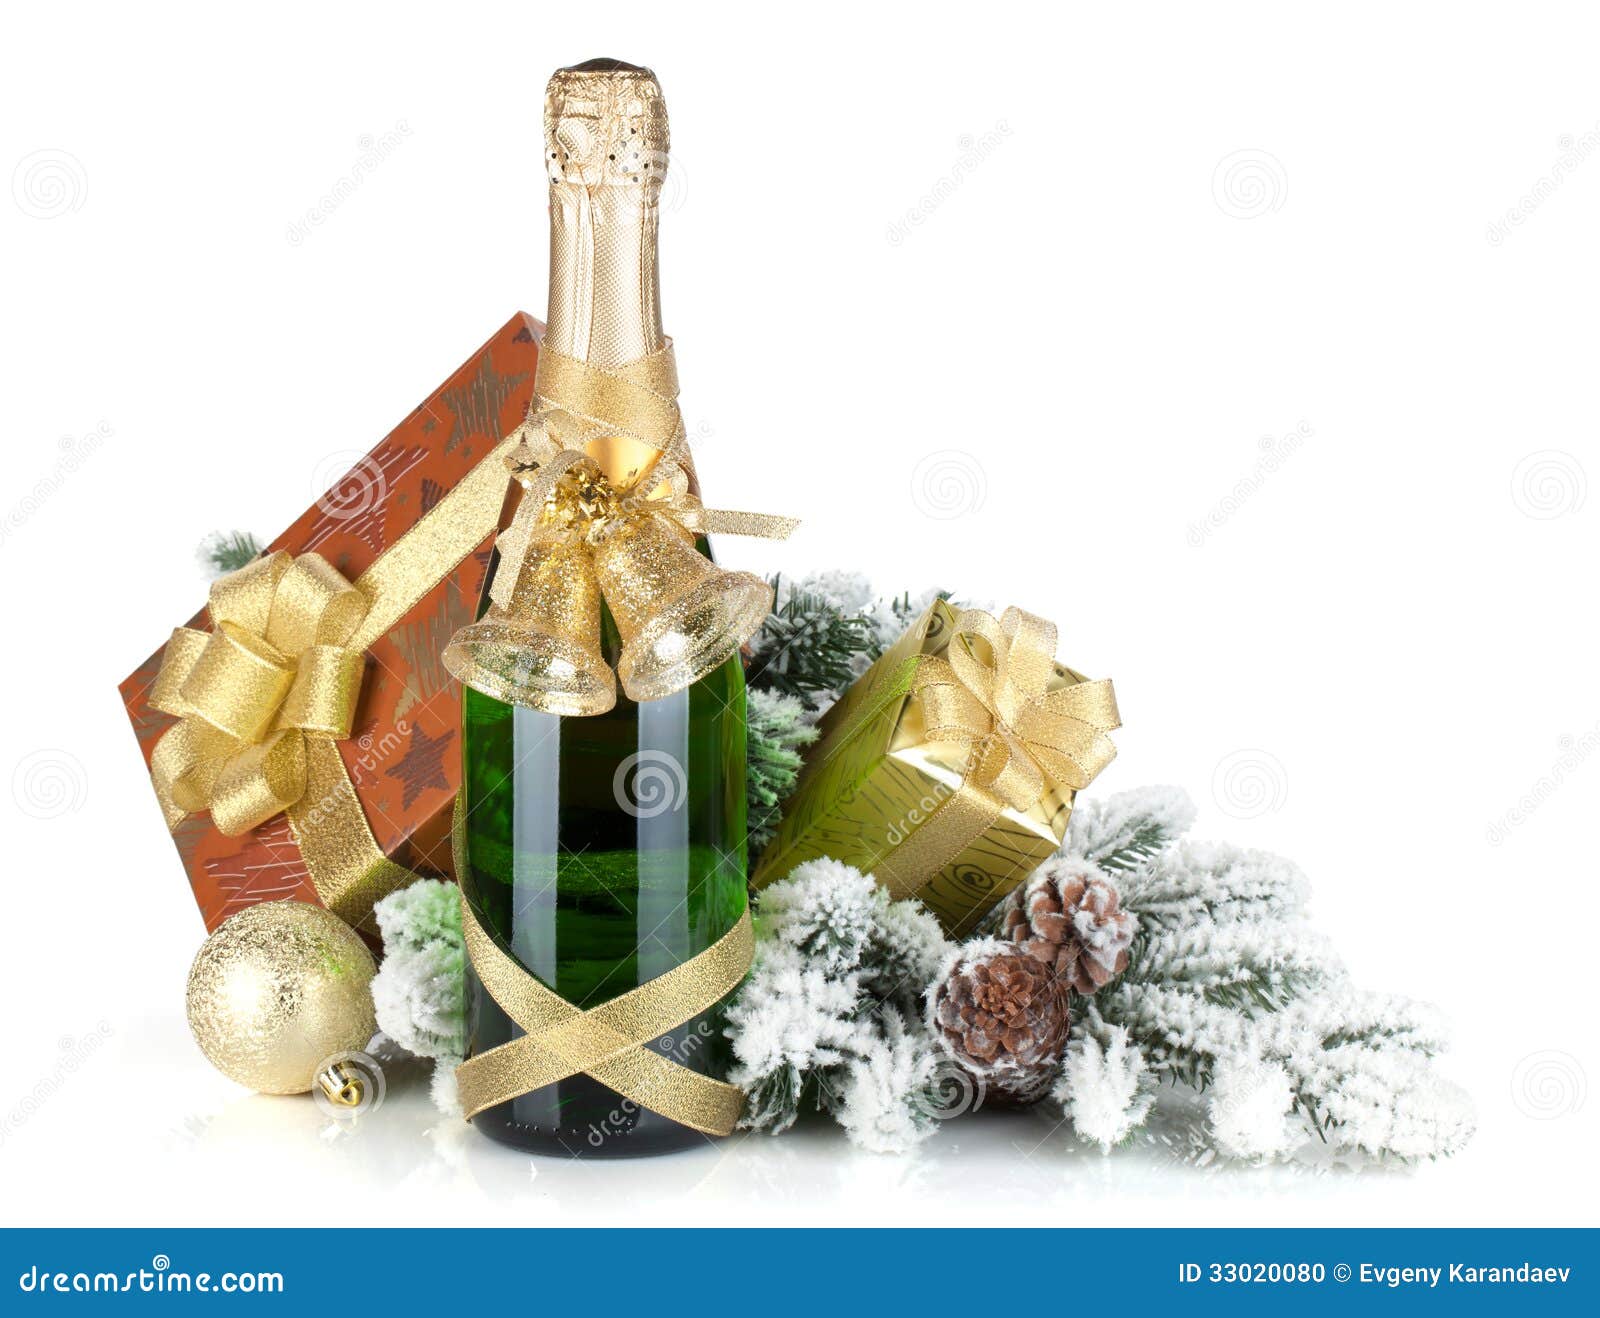 Champagne Bottle, Christmas Gift Box, Decor And Fir Tree 